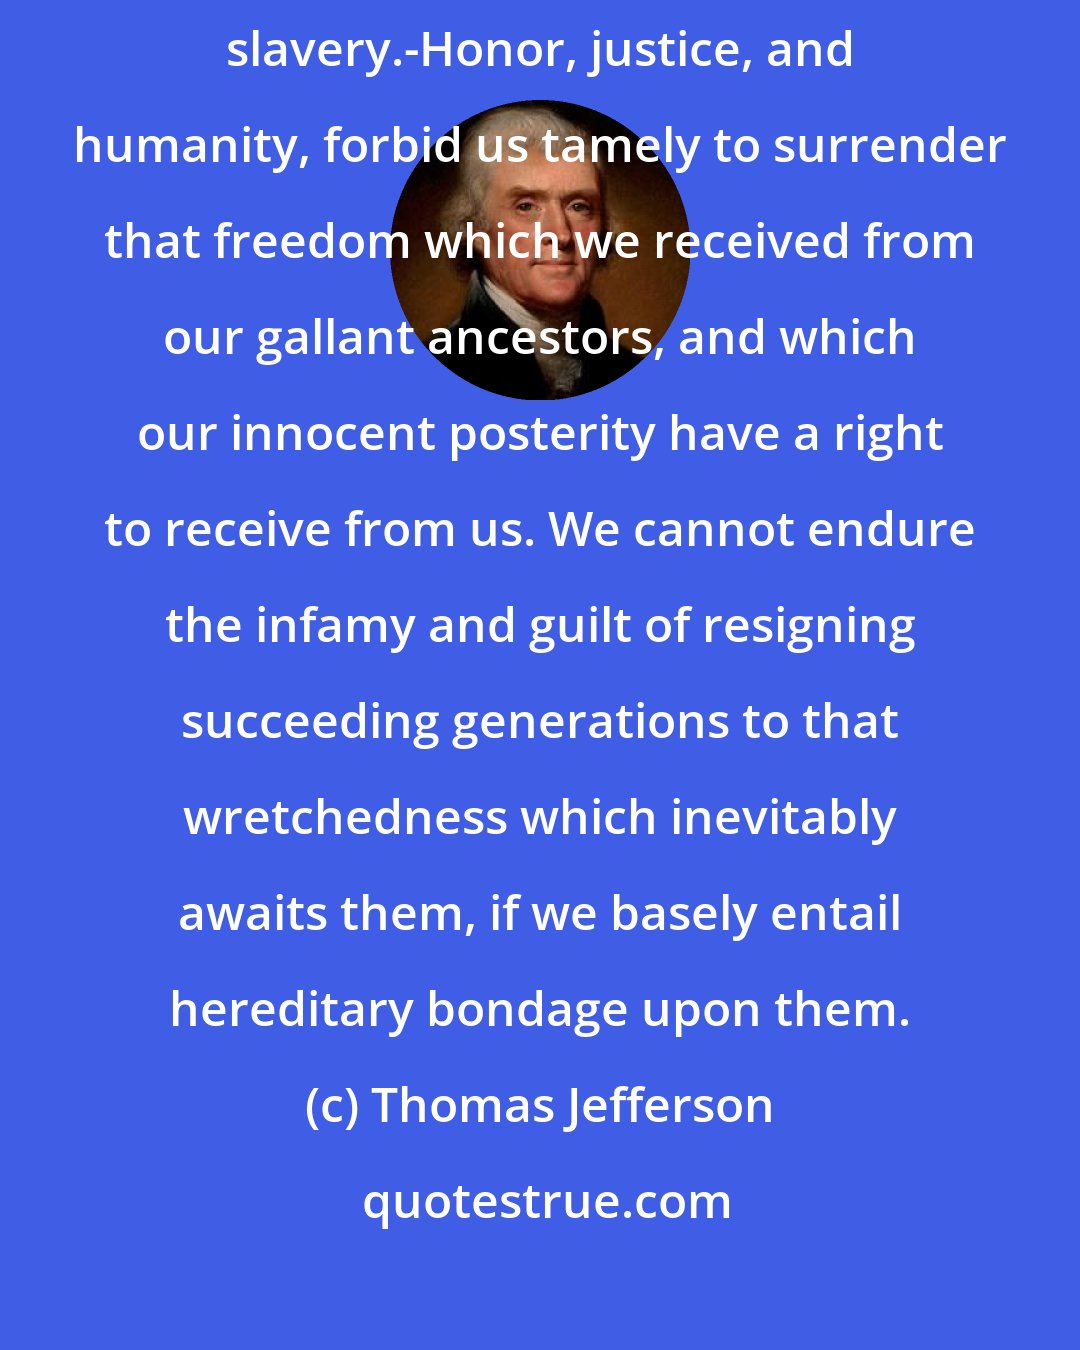 Thomas Jefferson: We have counted the cost of this contest, and find nothing so dreadful as voluntary slavery.-Honor, justice, and humanity, forbid us tamely to surrender that freedom which we received from our gallant ancestors, and which our innocent posterity have a right to receive from us. We cannot endure the infamy and guilt of resigning succeeding generations to that wretchedness which inevitably awaits them, if we basely entail hereditary bondage upon them.